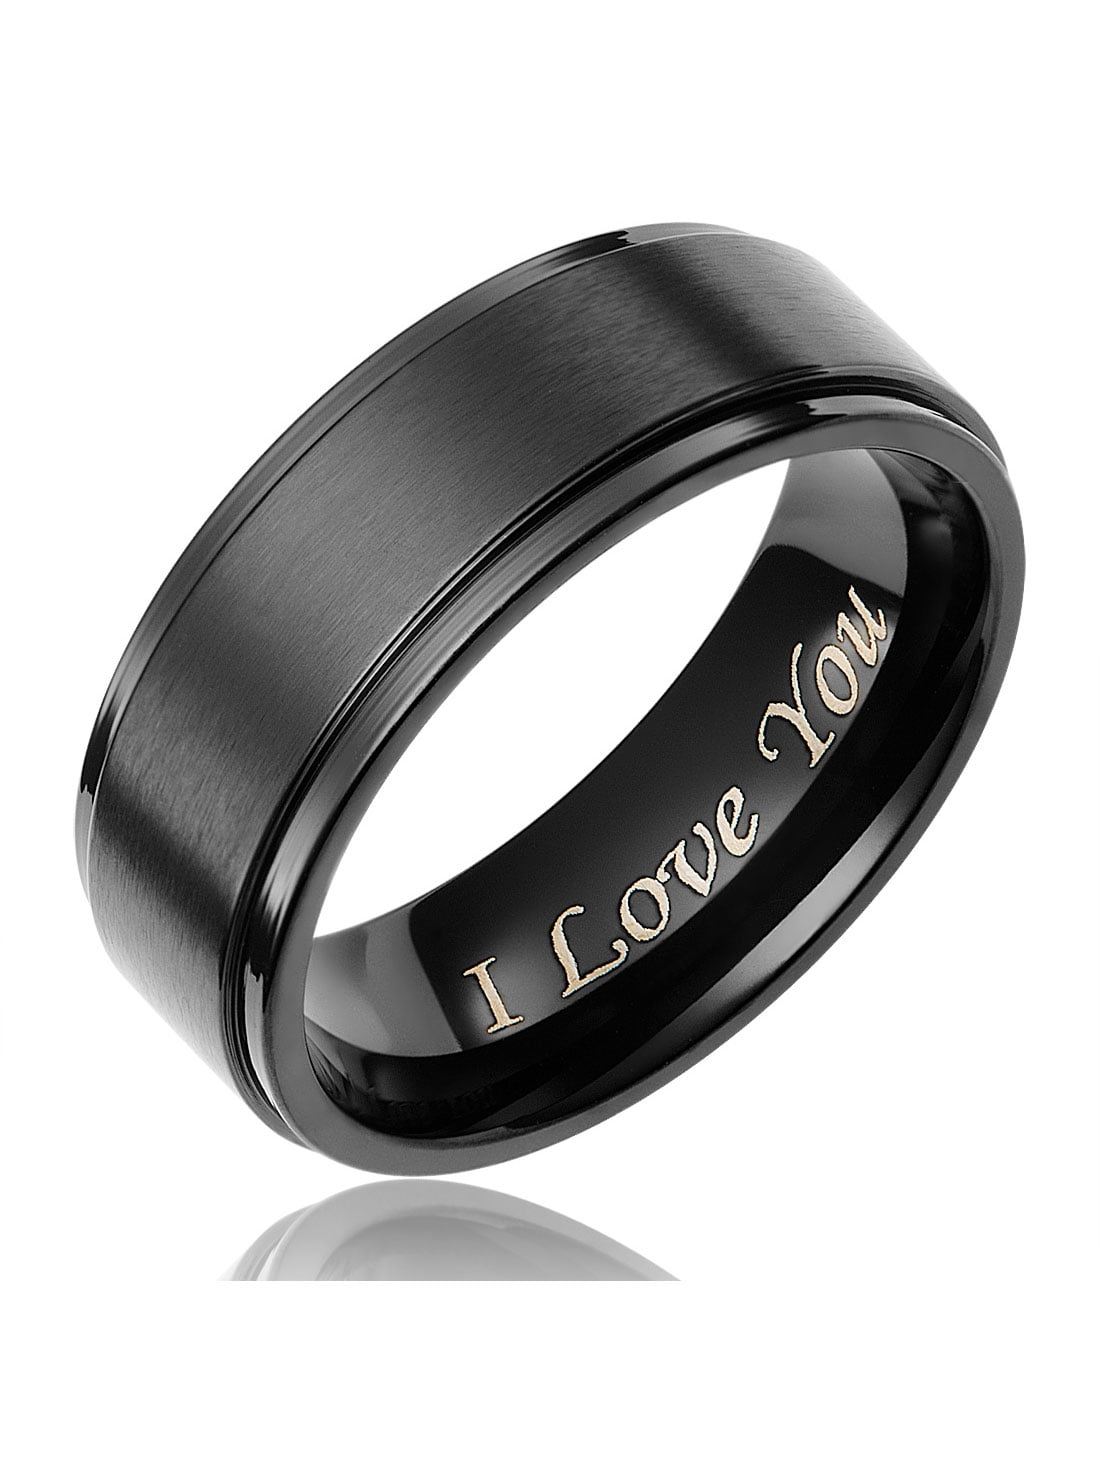 Wedding Bands Classic Bands Flat Bands Stainless Steel 8mm Black IP-plated Polished Flat Band Size 9